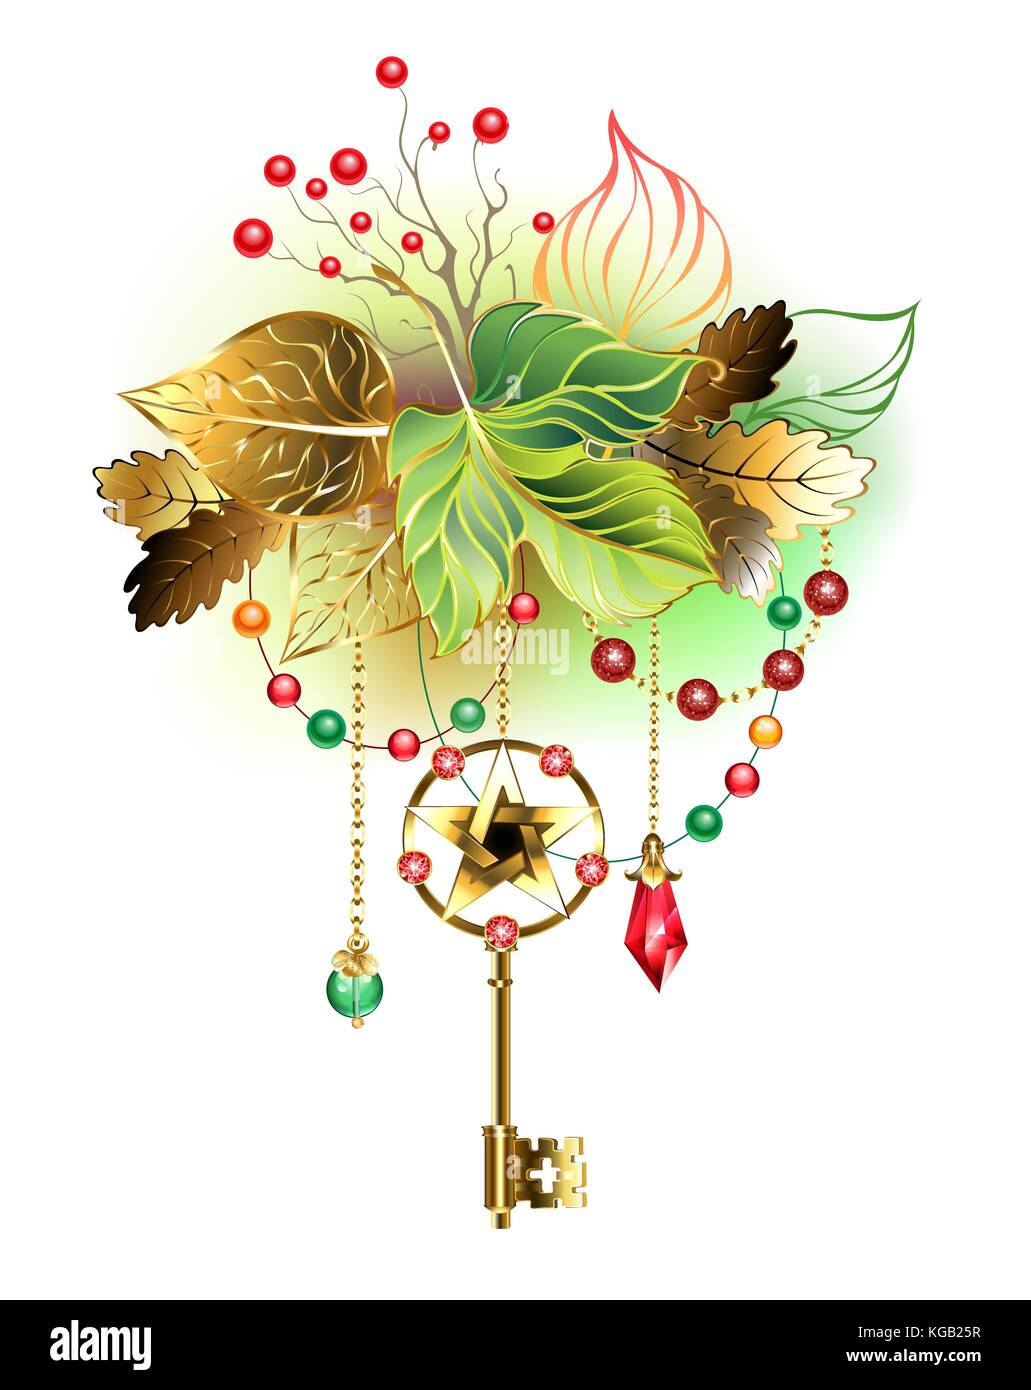 Antique gold decorated with magic pentagram key with gold and green autumn leaves on a white background. Design of jewelry. Stock Vector